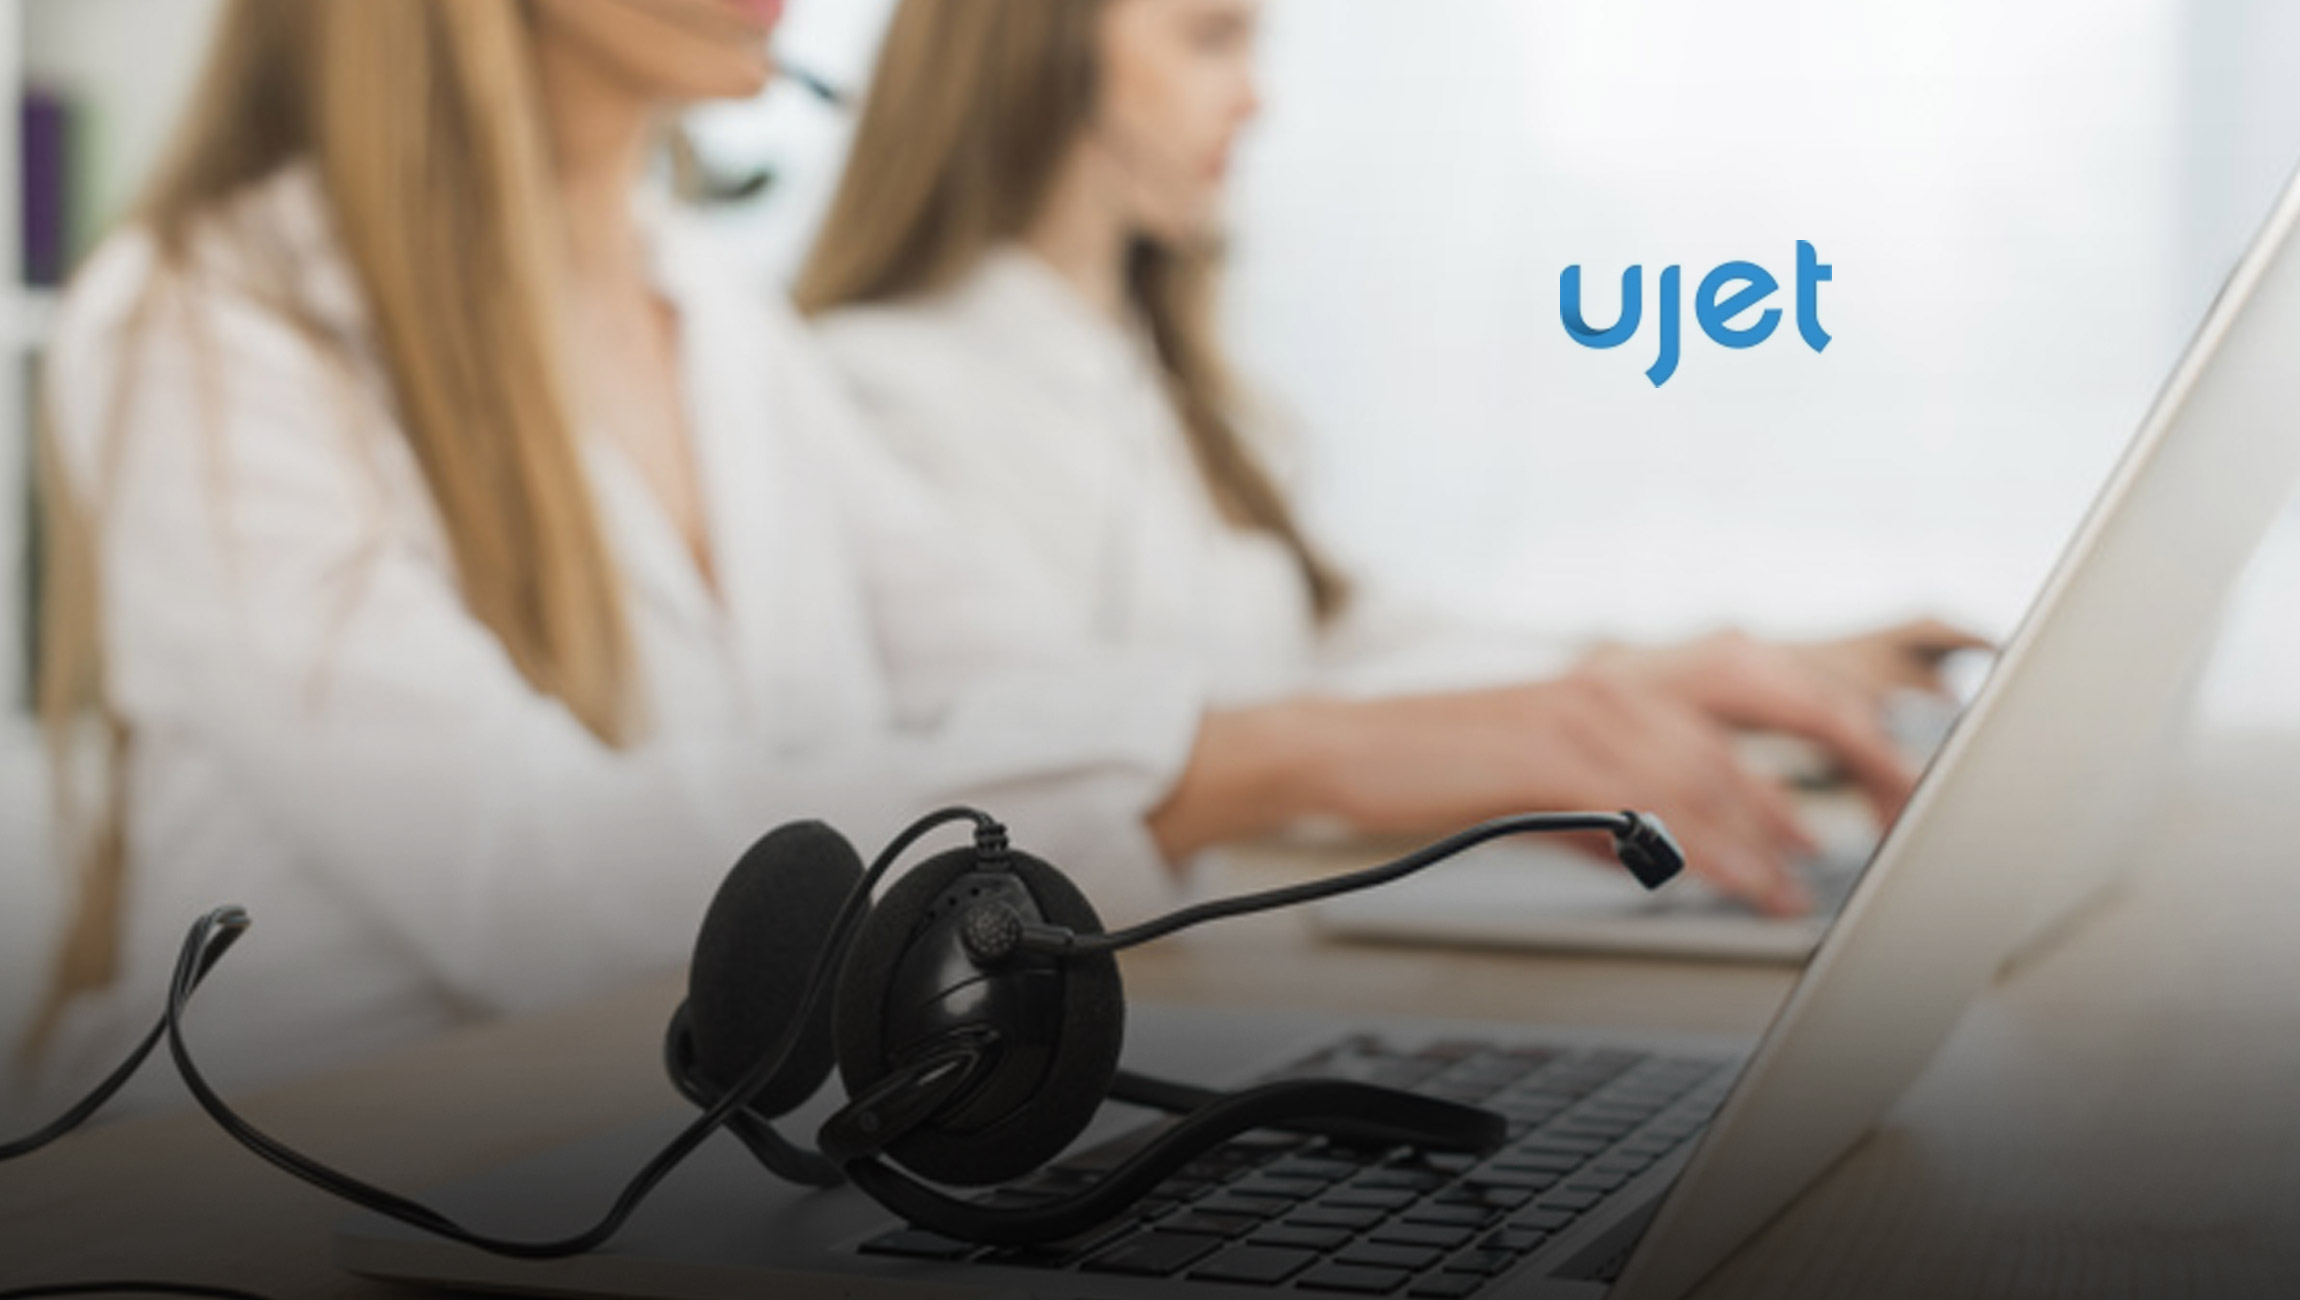 UJET Launches Highly Flexible Options for Small and Medium Contact Centers